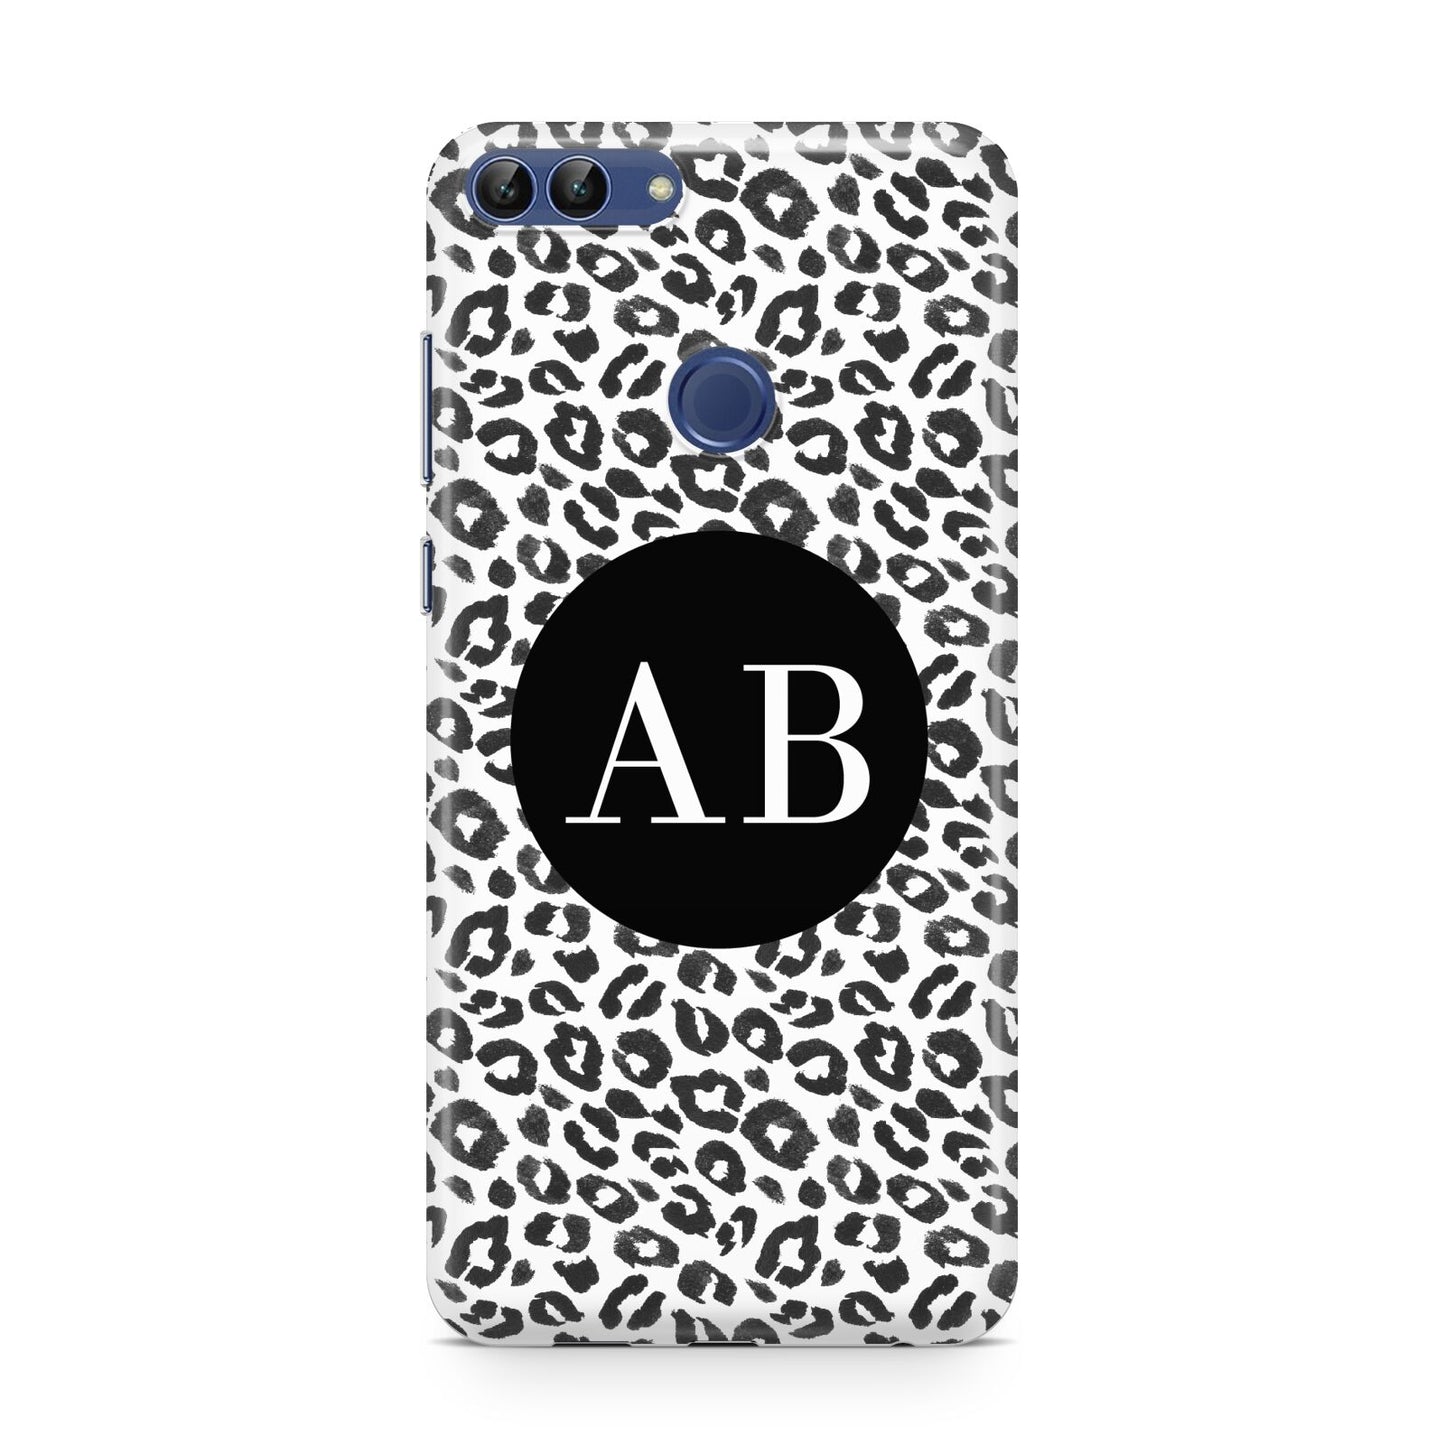 Leopard Print Black and White Huawei P Smart Case